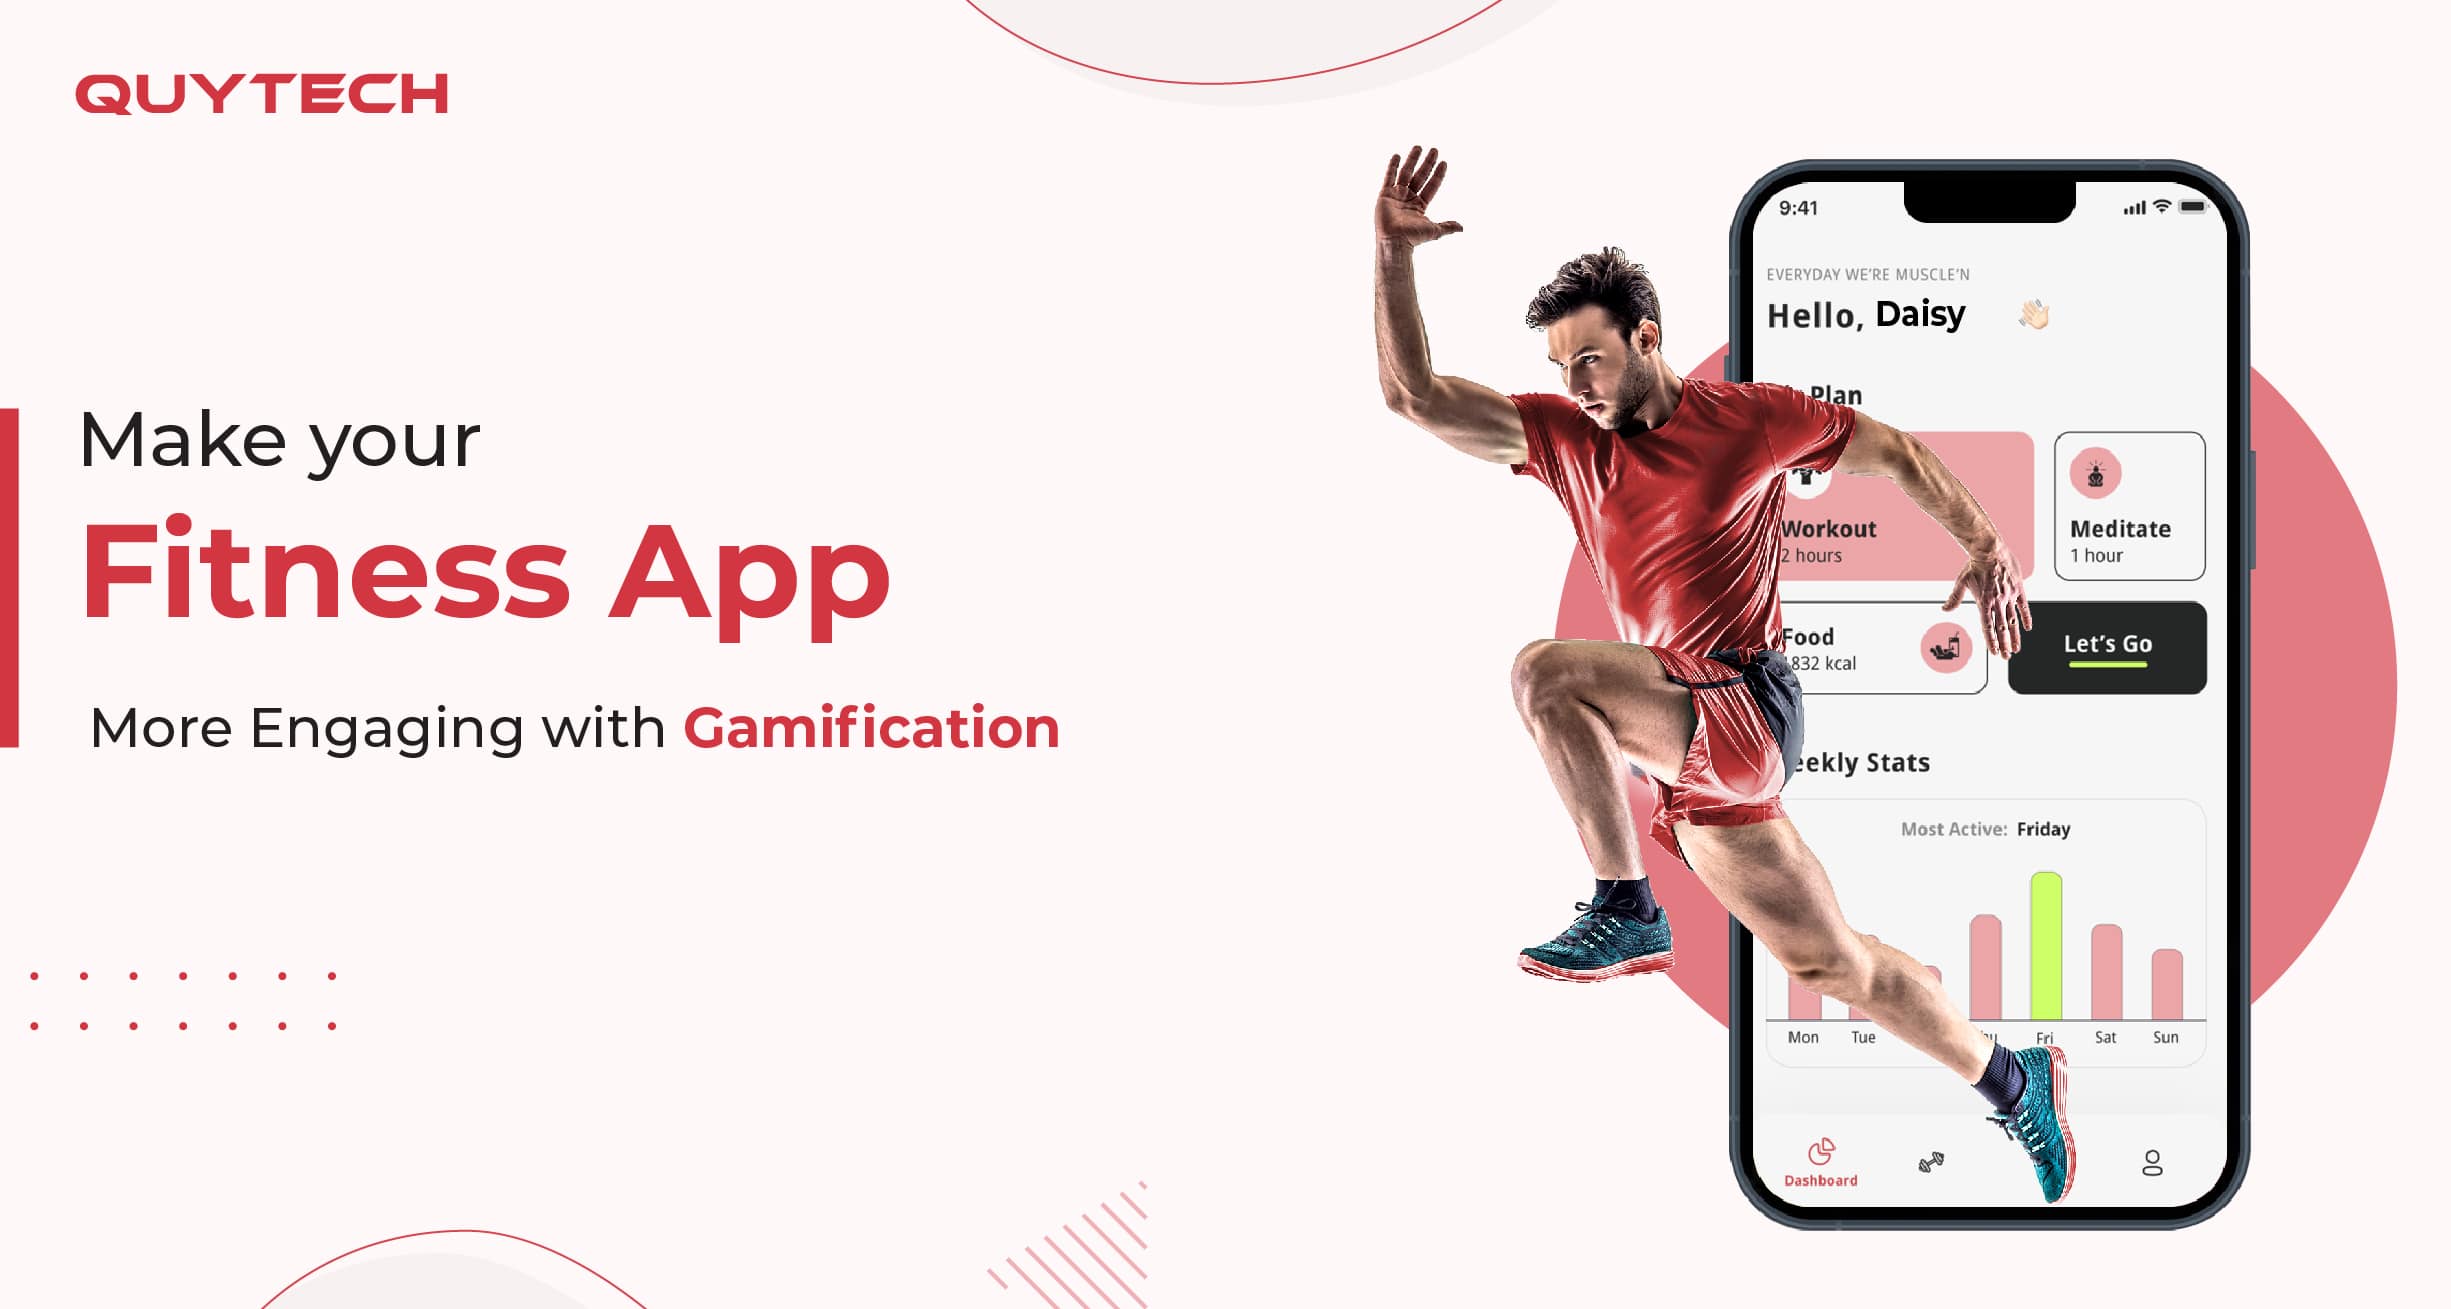 Make Your Fitness App More Engaging with Gamification